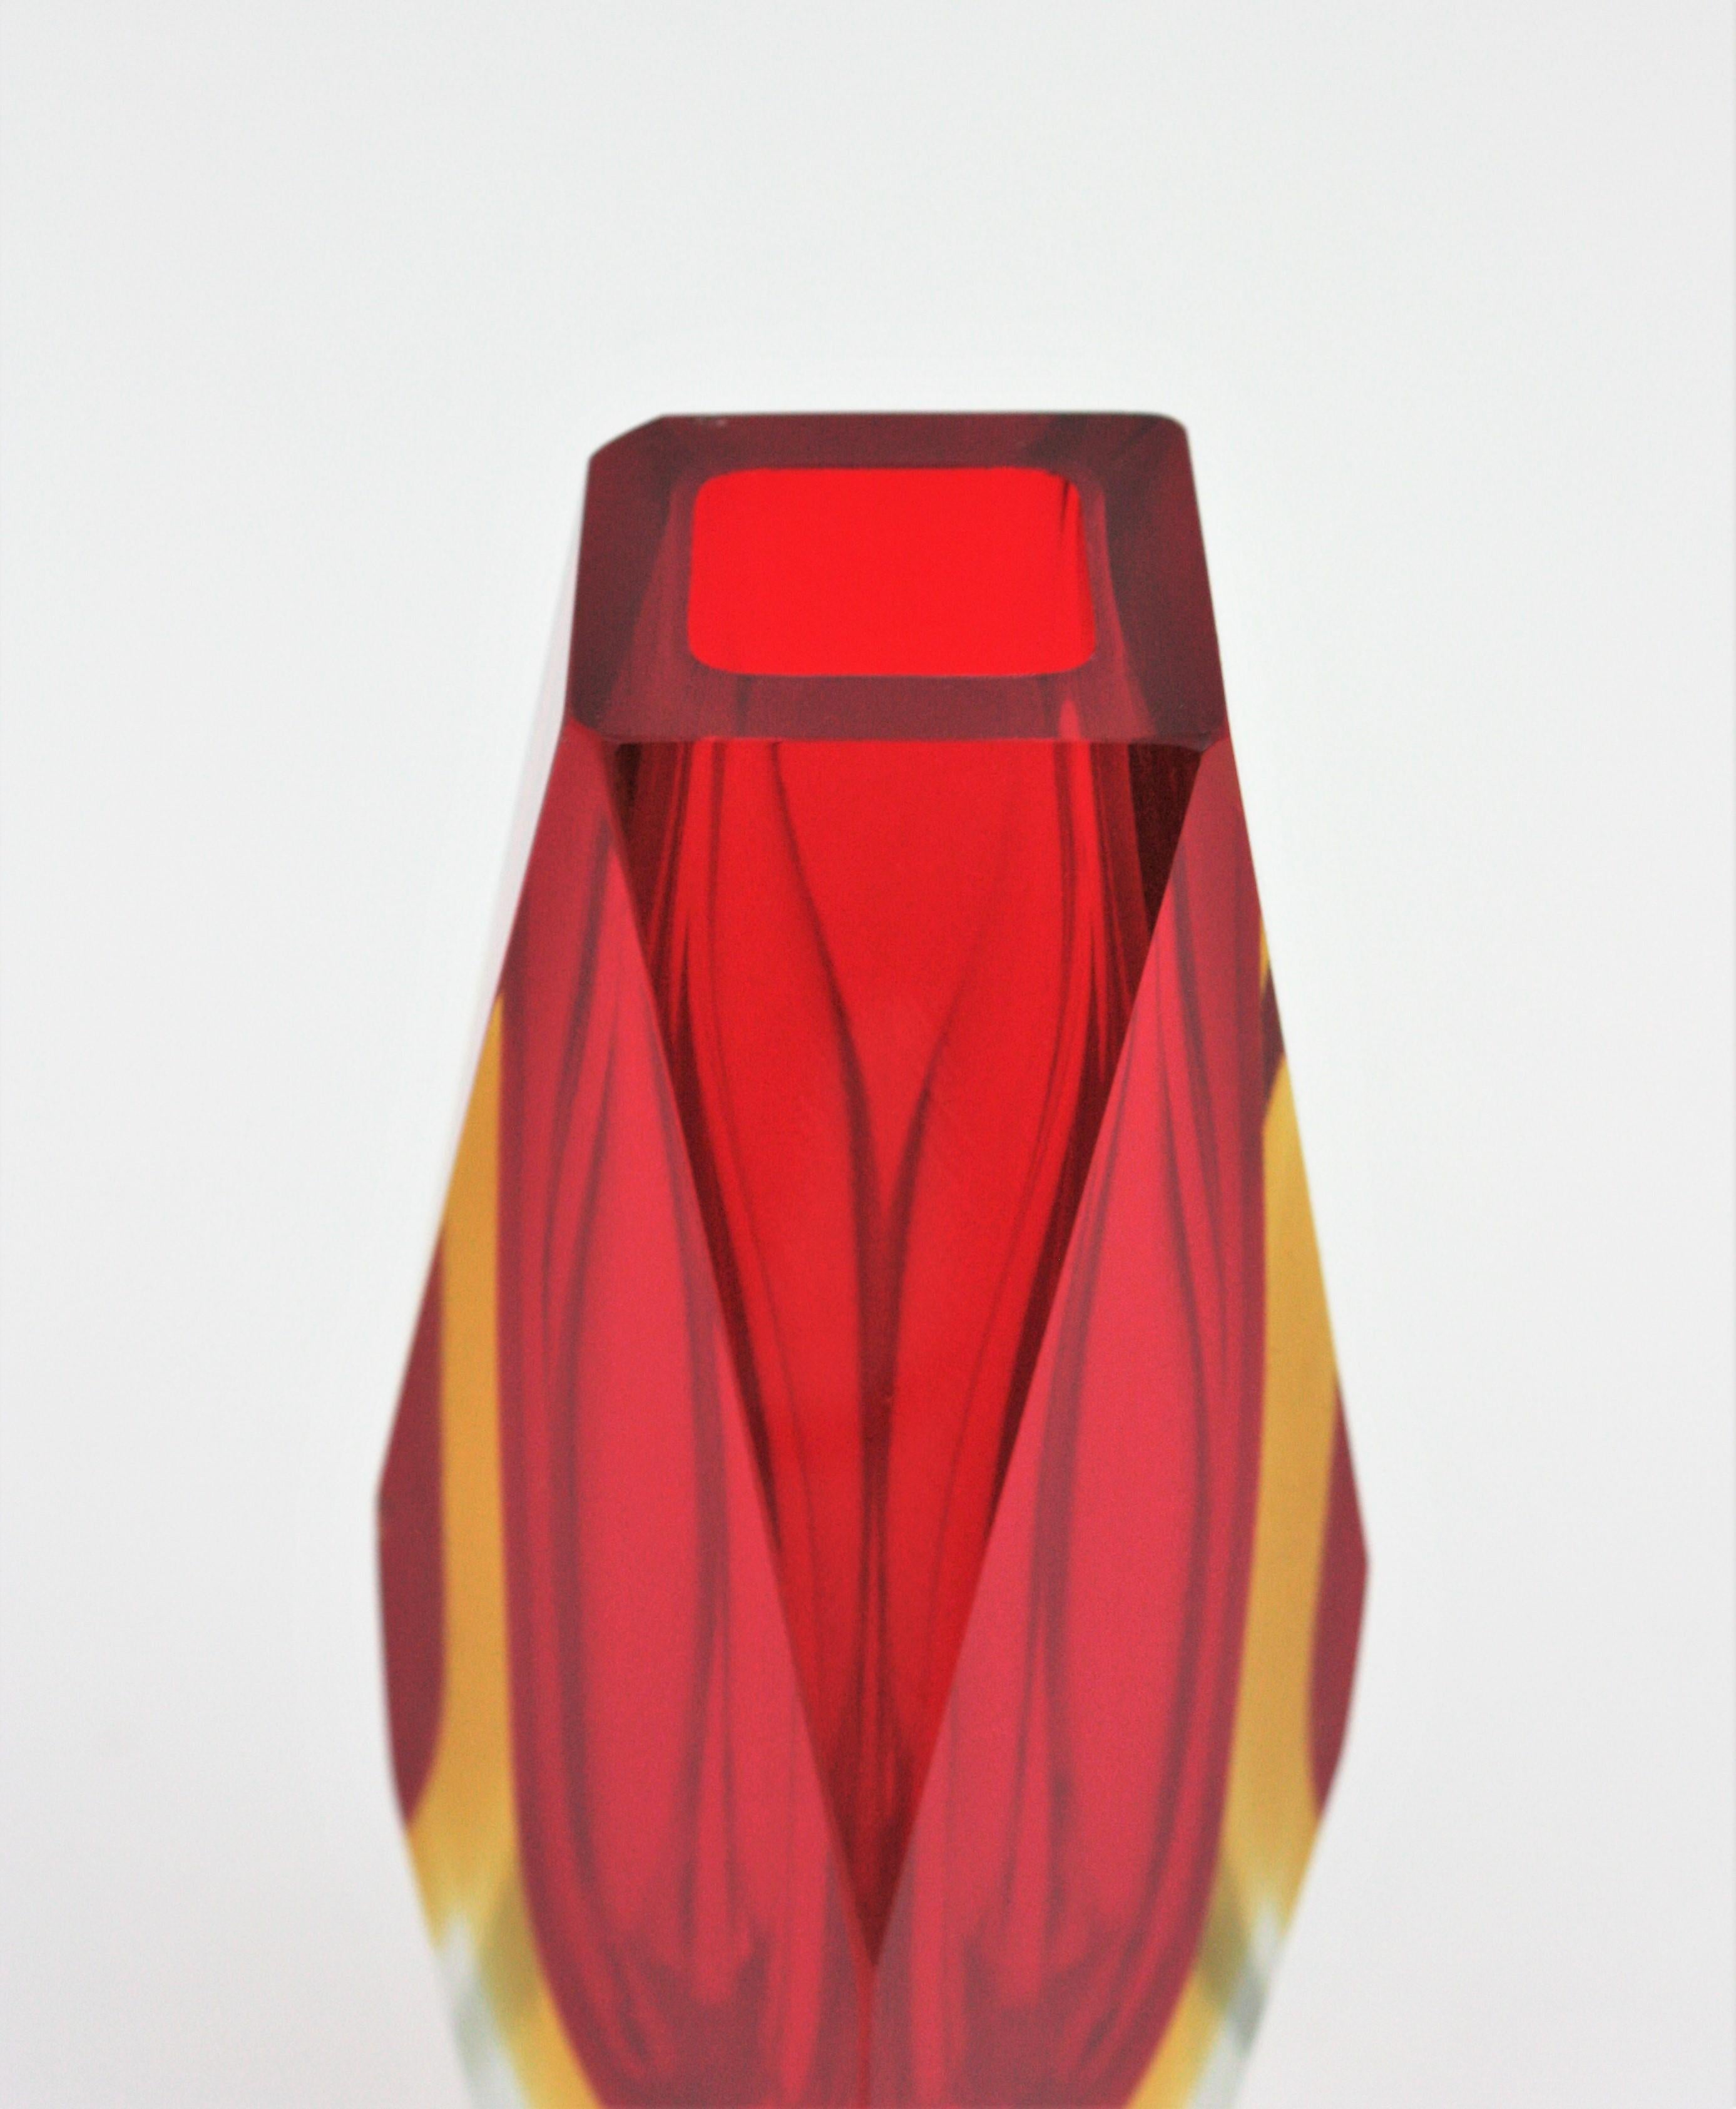 Huge Mandruzzato Murano Faceted Sommerso Red and Yellow Art Glass Vase 3